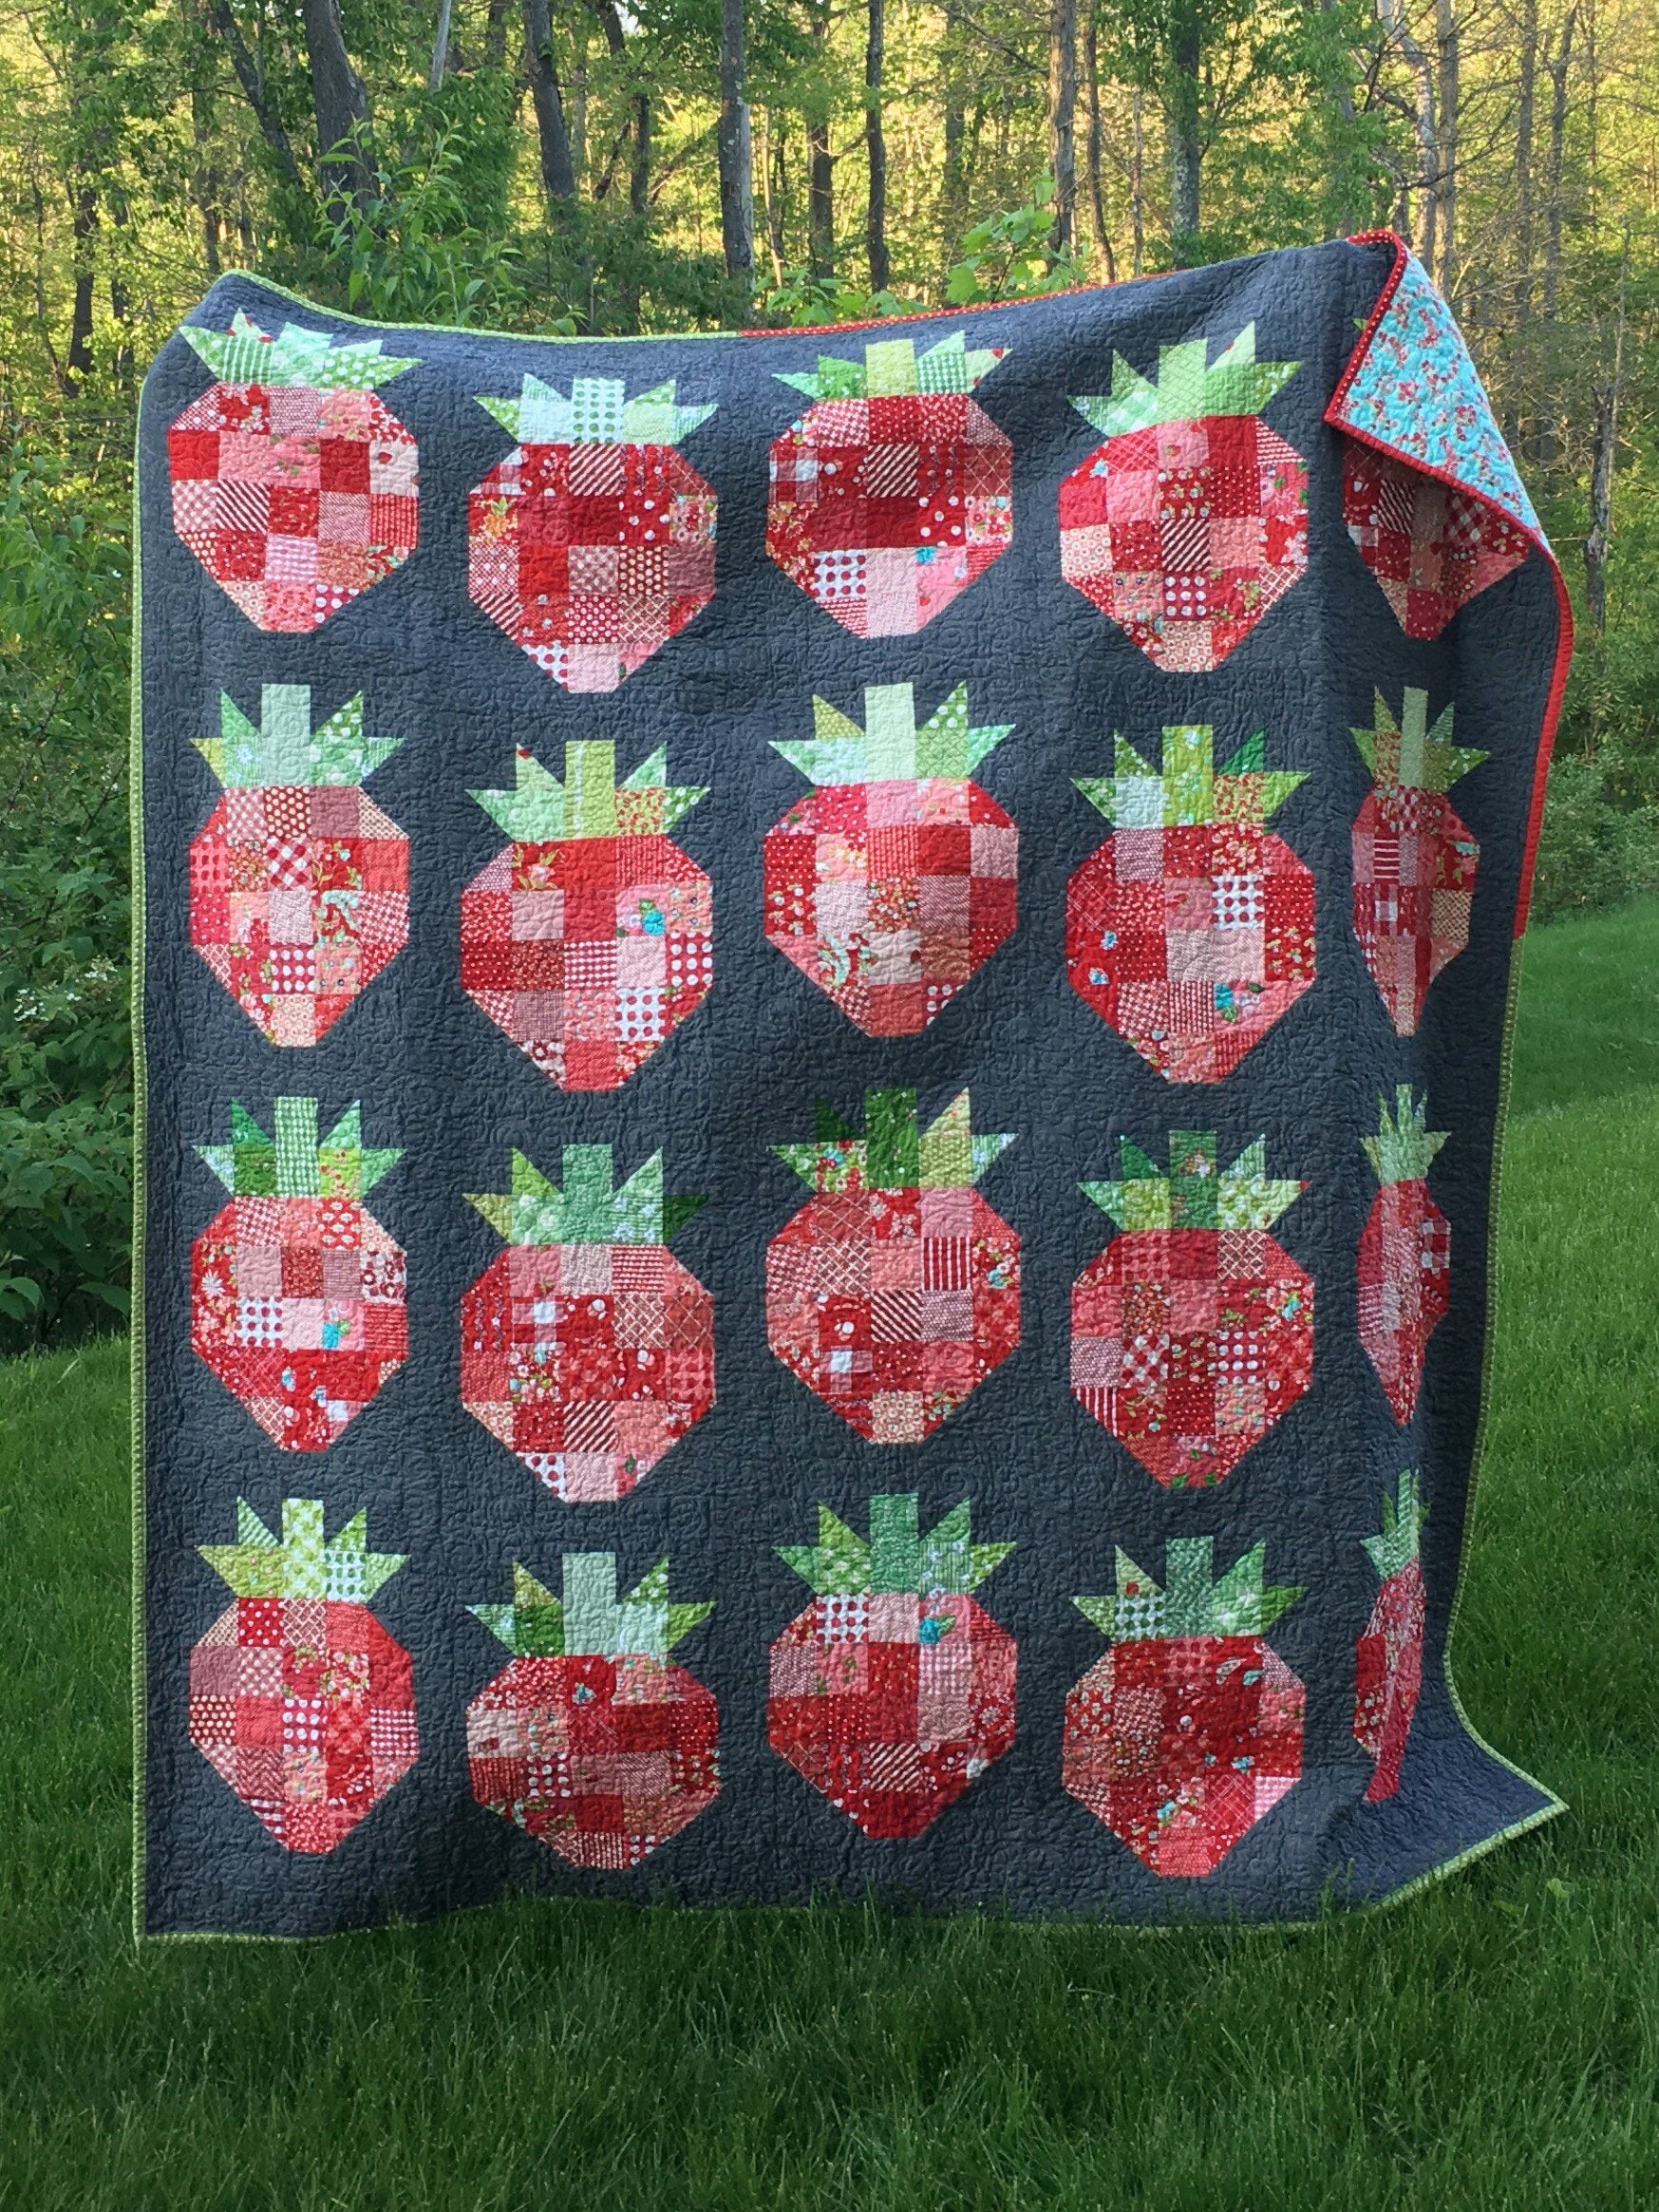 Strawberry Patch Big Strawberry Fabric Panel 18 Inches by 18 Inches